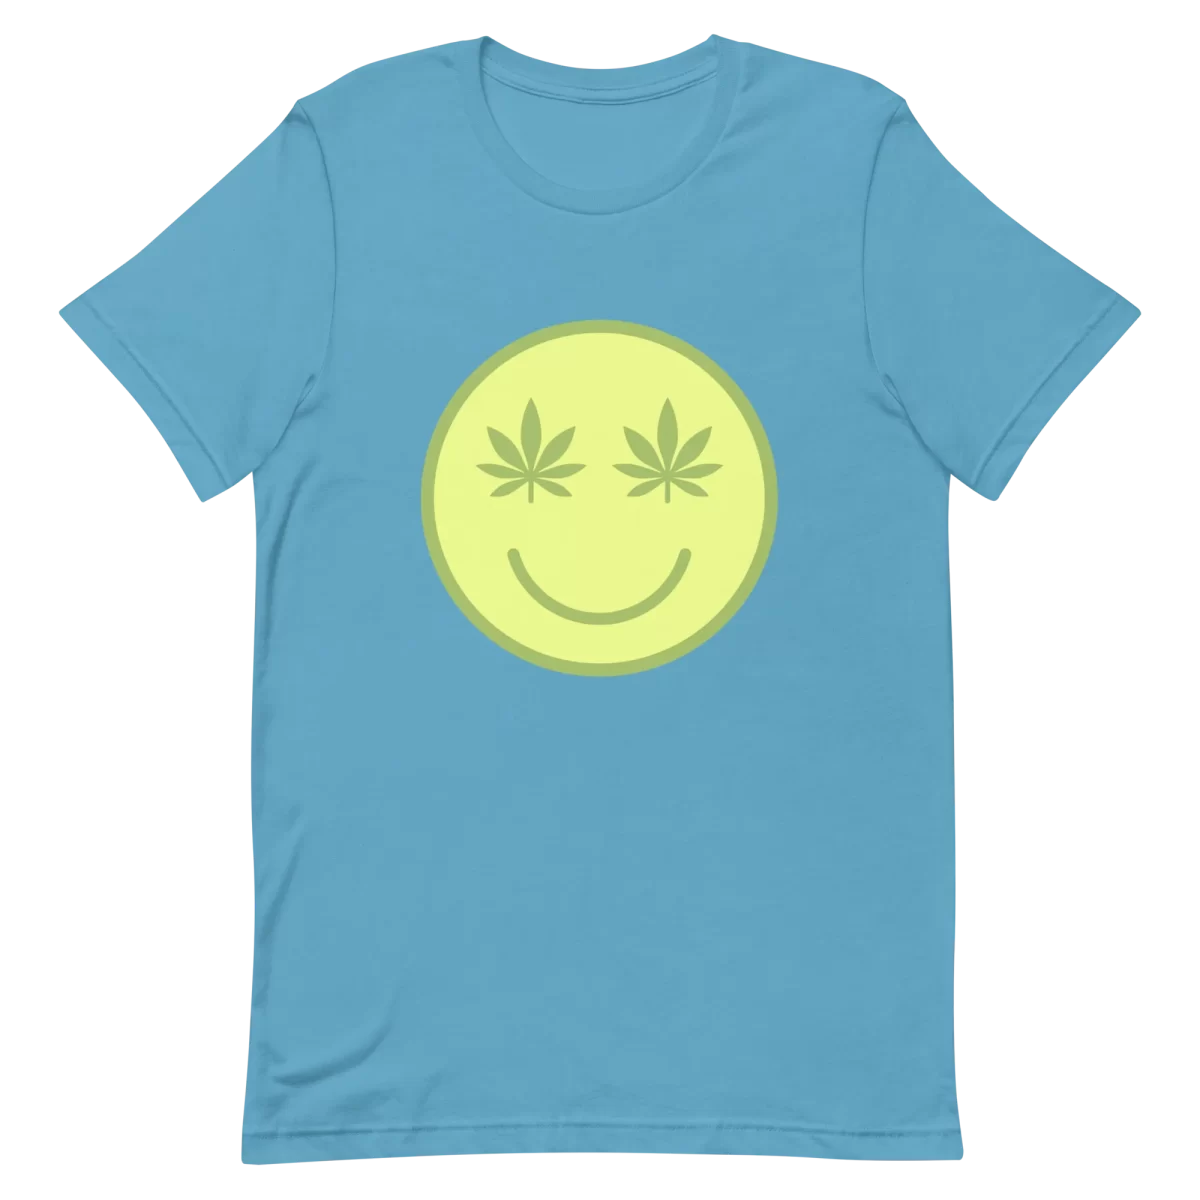 Unisex T-Shirt - Smiley Face with weed - Ocean Blue